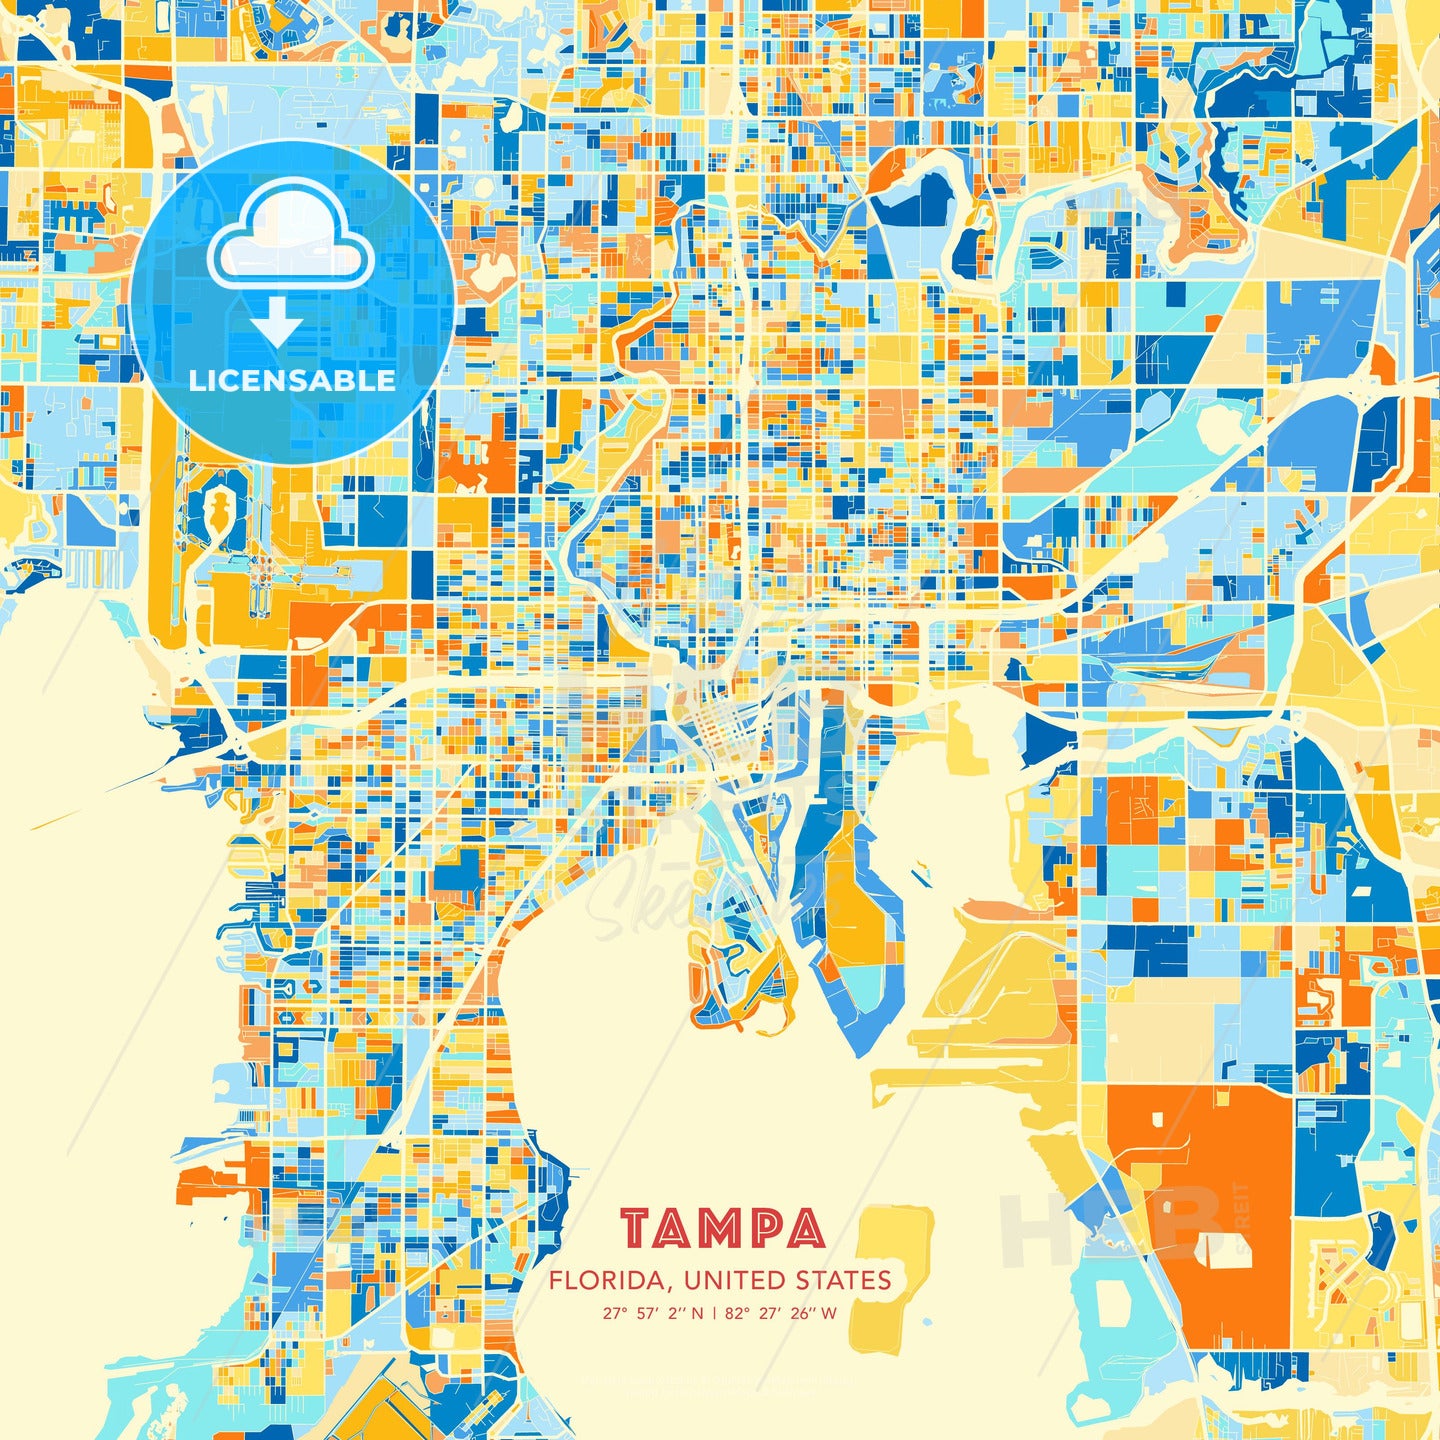 Tampa, Florida, United States, map - HEBSTREITS Sketches